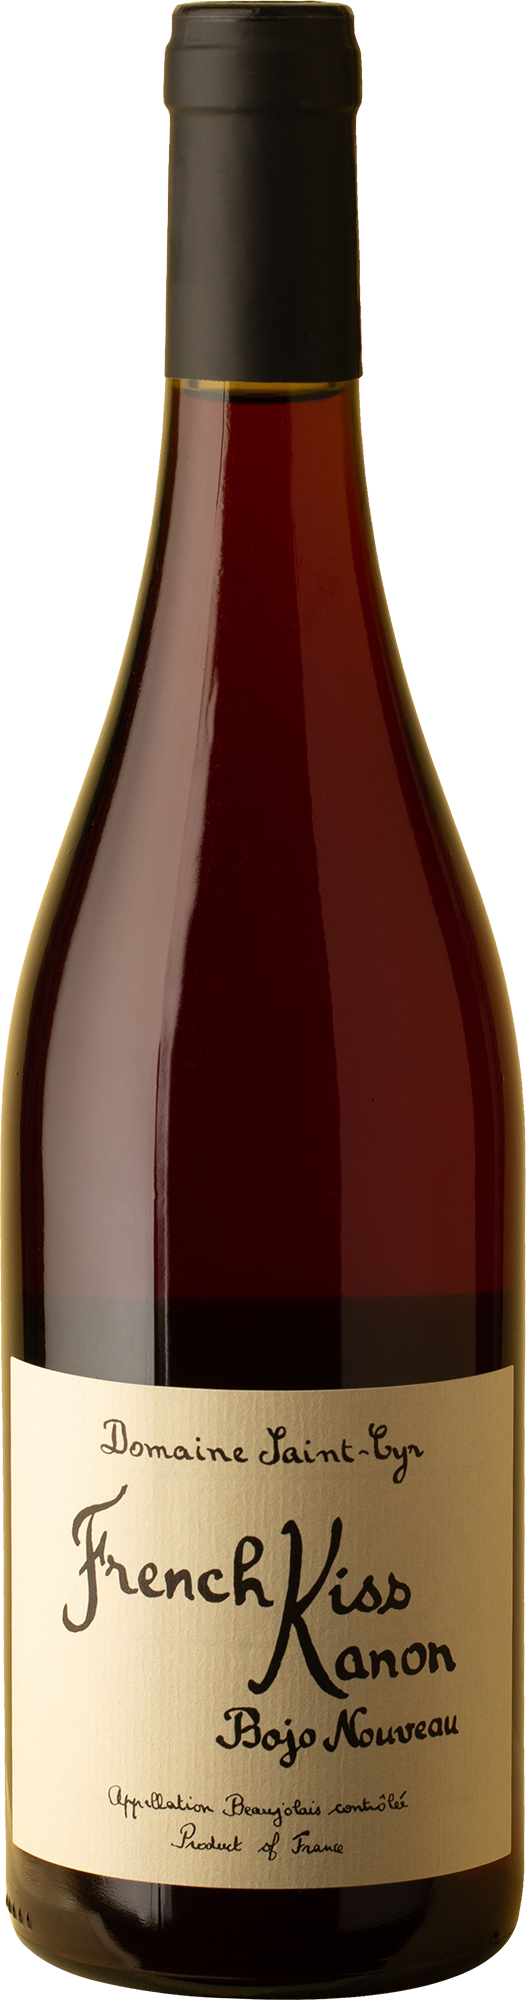 Domaine Saint-Cyr - Beaujolais French Kiss Kanon Gamay 2021 Red Wine